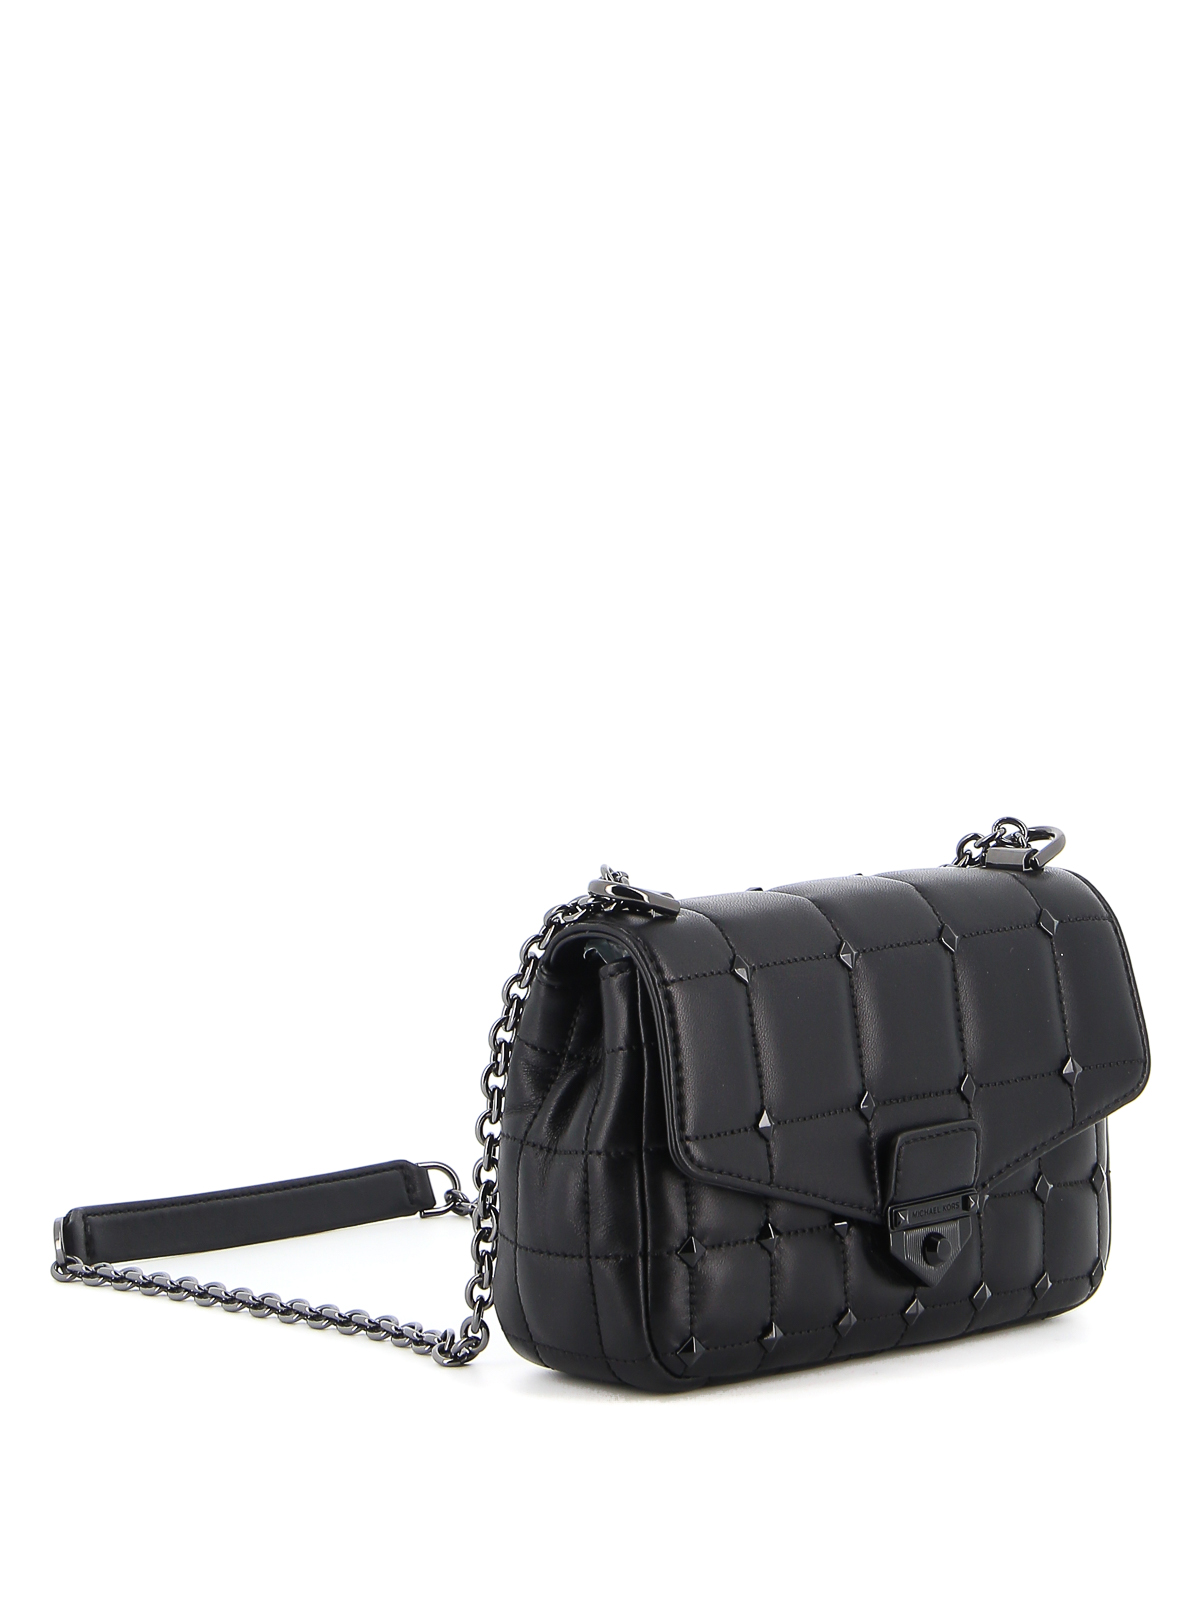 Soho Small Quilted Leather Shoulder Bag